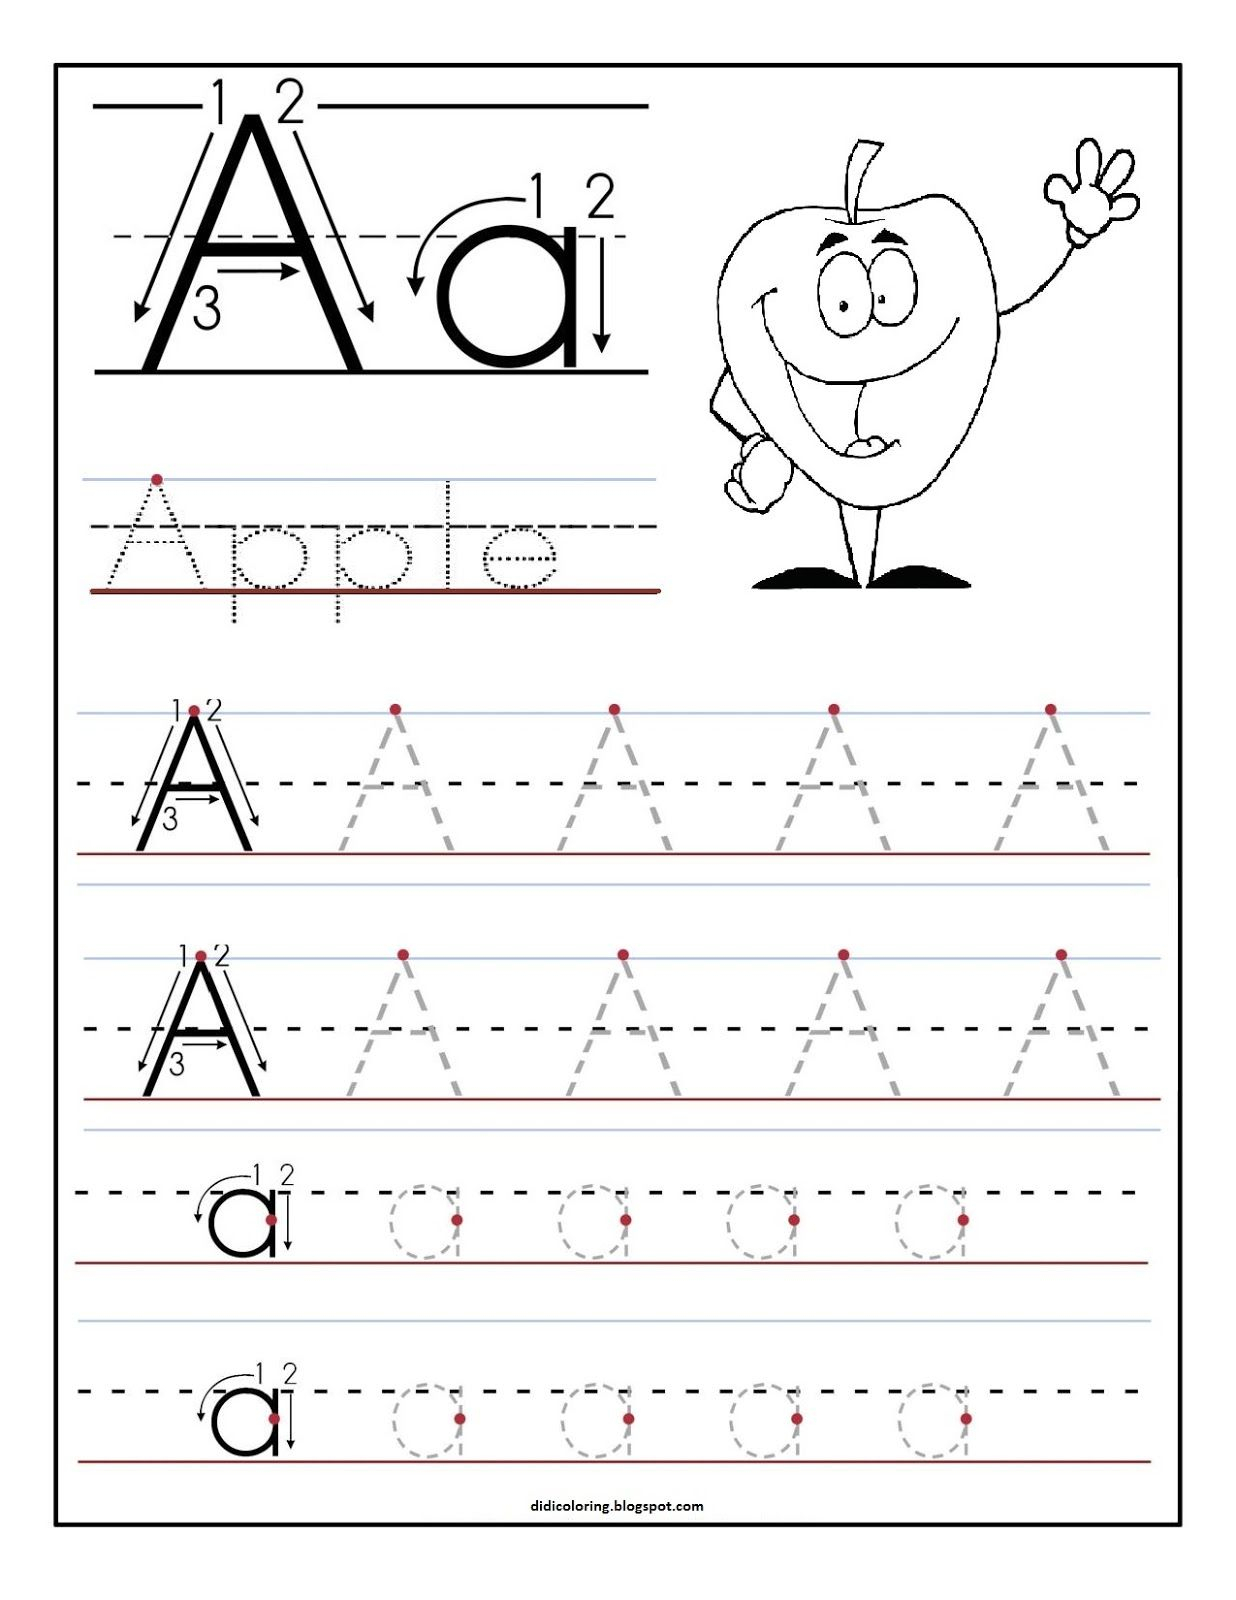 Free Printable Worksheet Letter A For Your Child To Learn inside Letter A Alphabet Worksheets